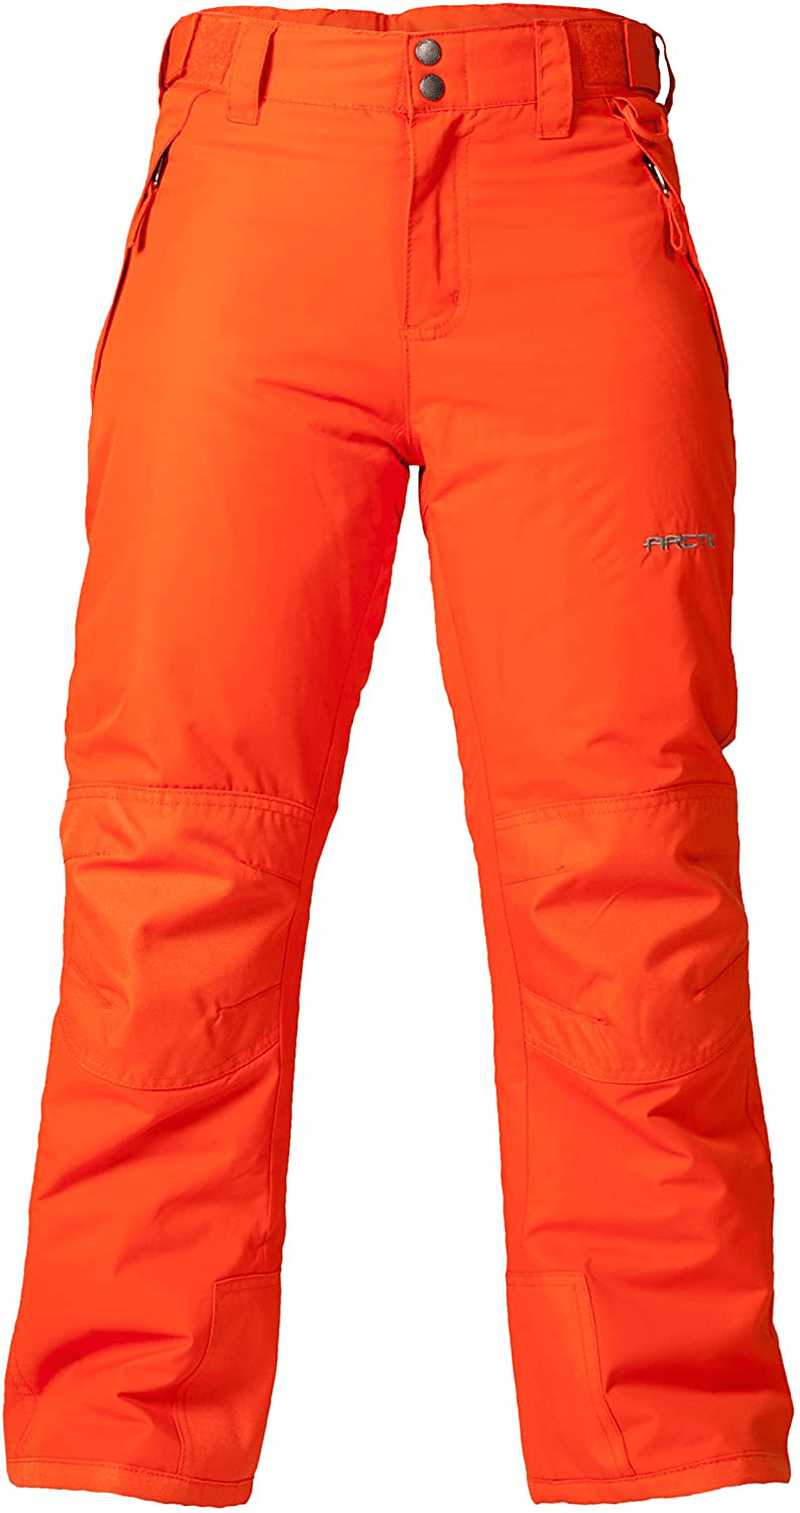 Arctix Kids Snow Pants with Reinforced Knees and Seat Apparel & Accessories > Clothing > Outerwear > Snow Pants & Suits Arctix   